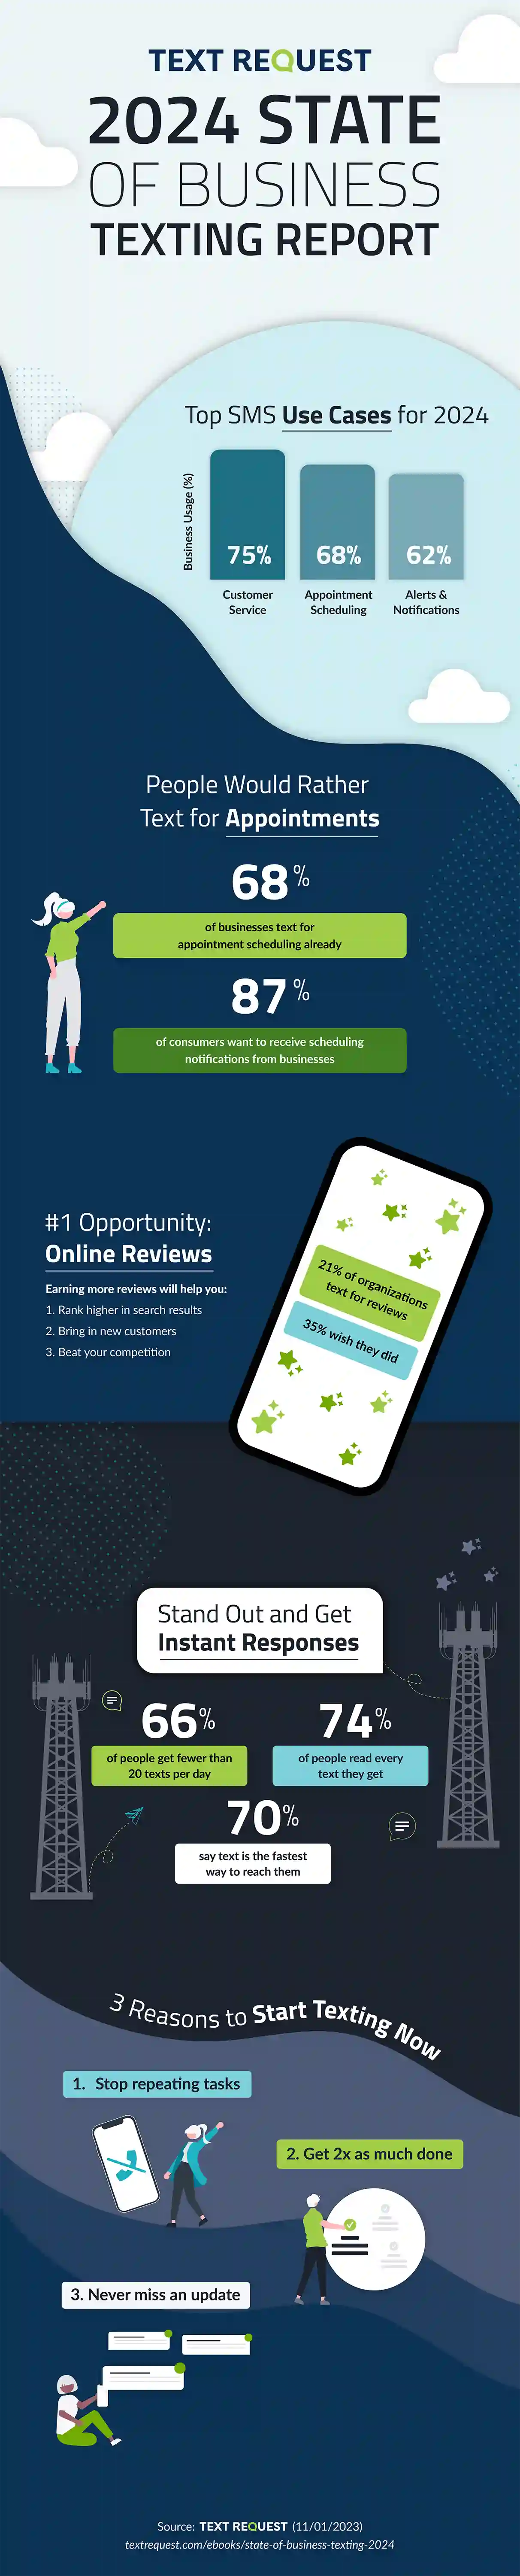 Text Request 2024 State of Business Texting Report infographic